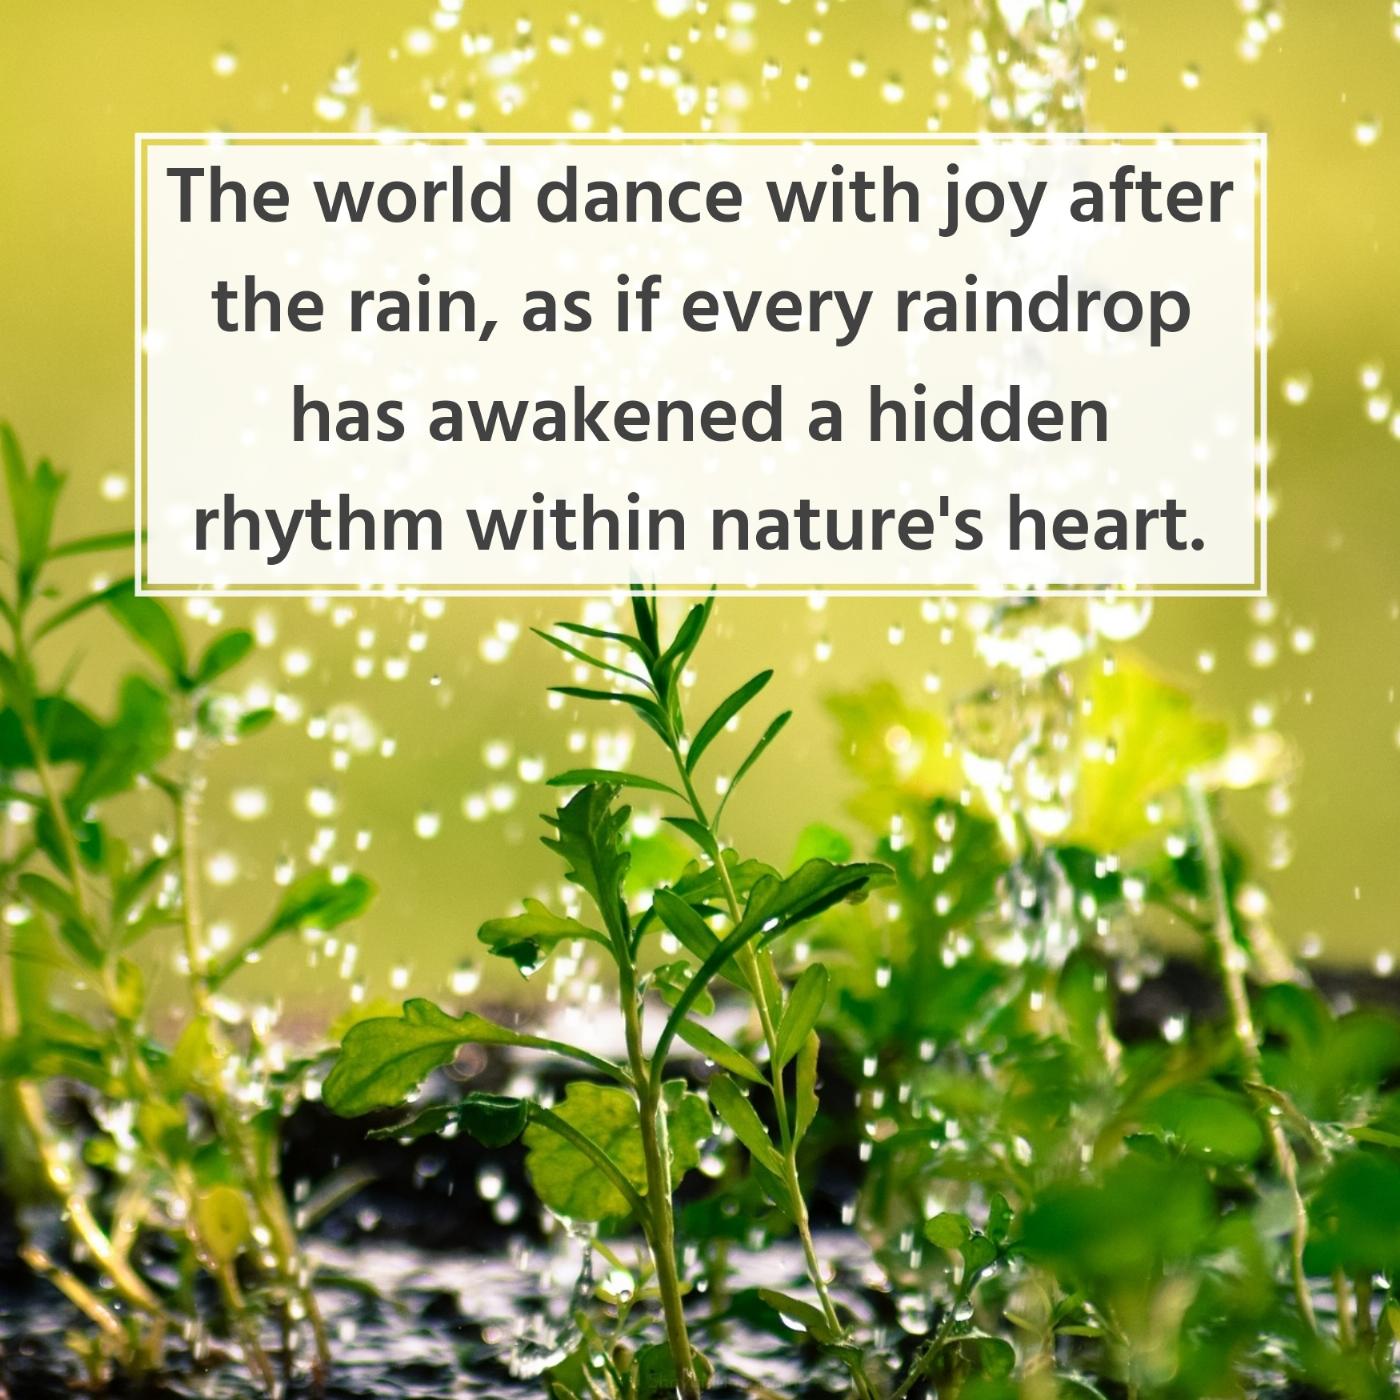 The world dance with joy after the rain